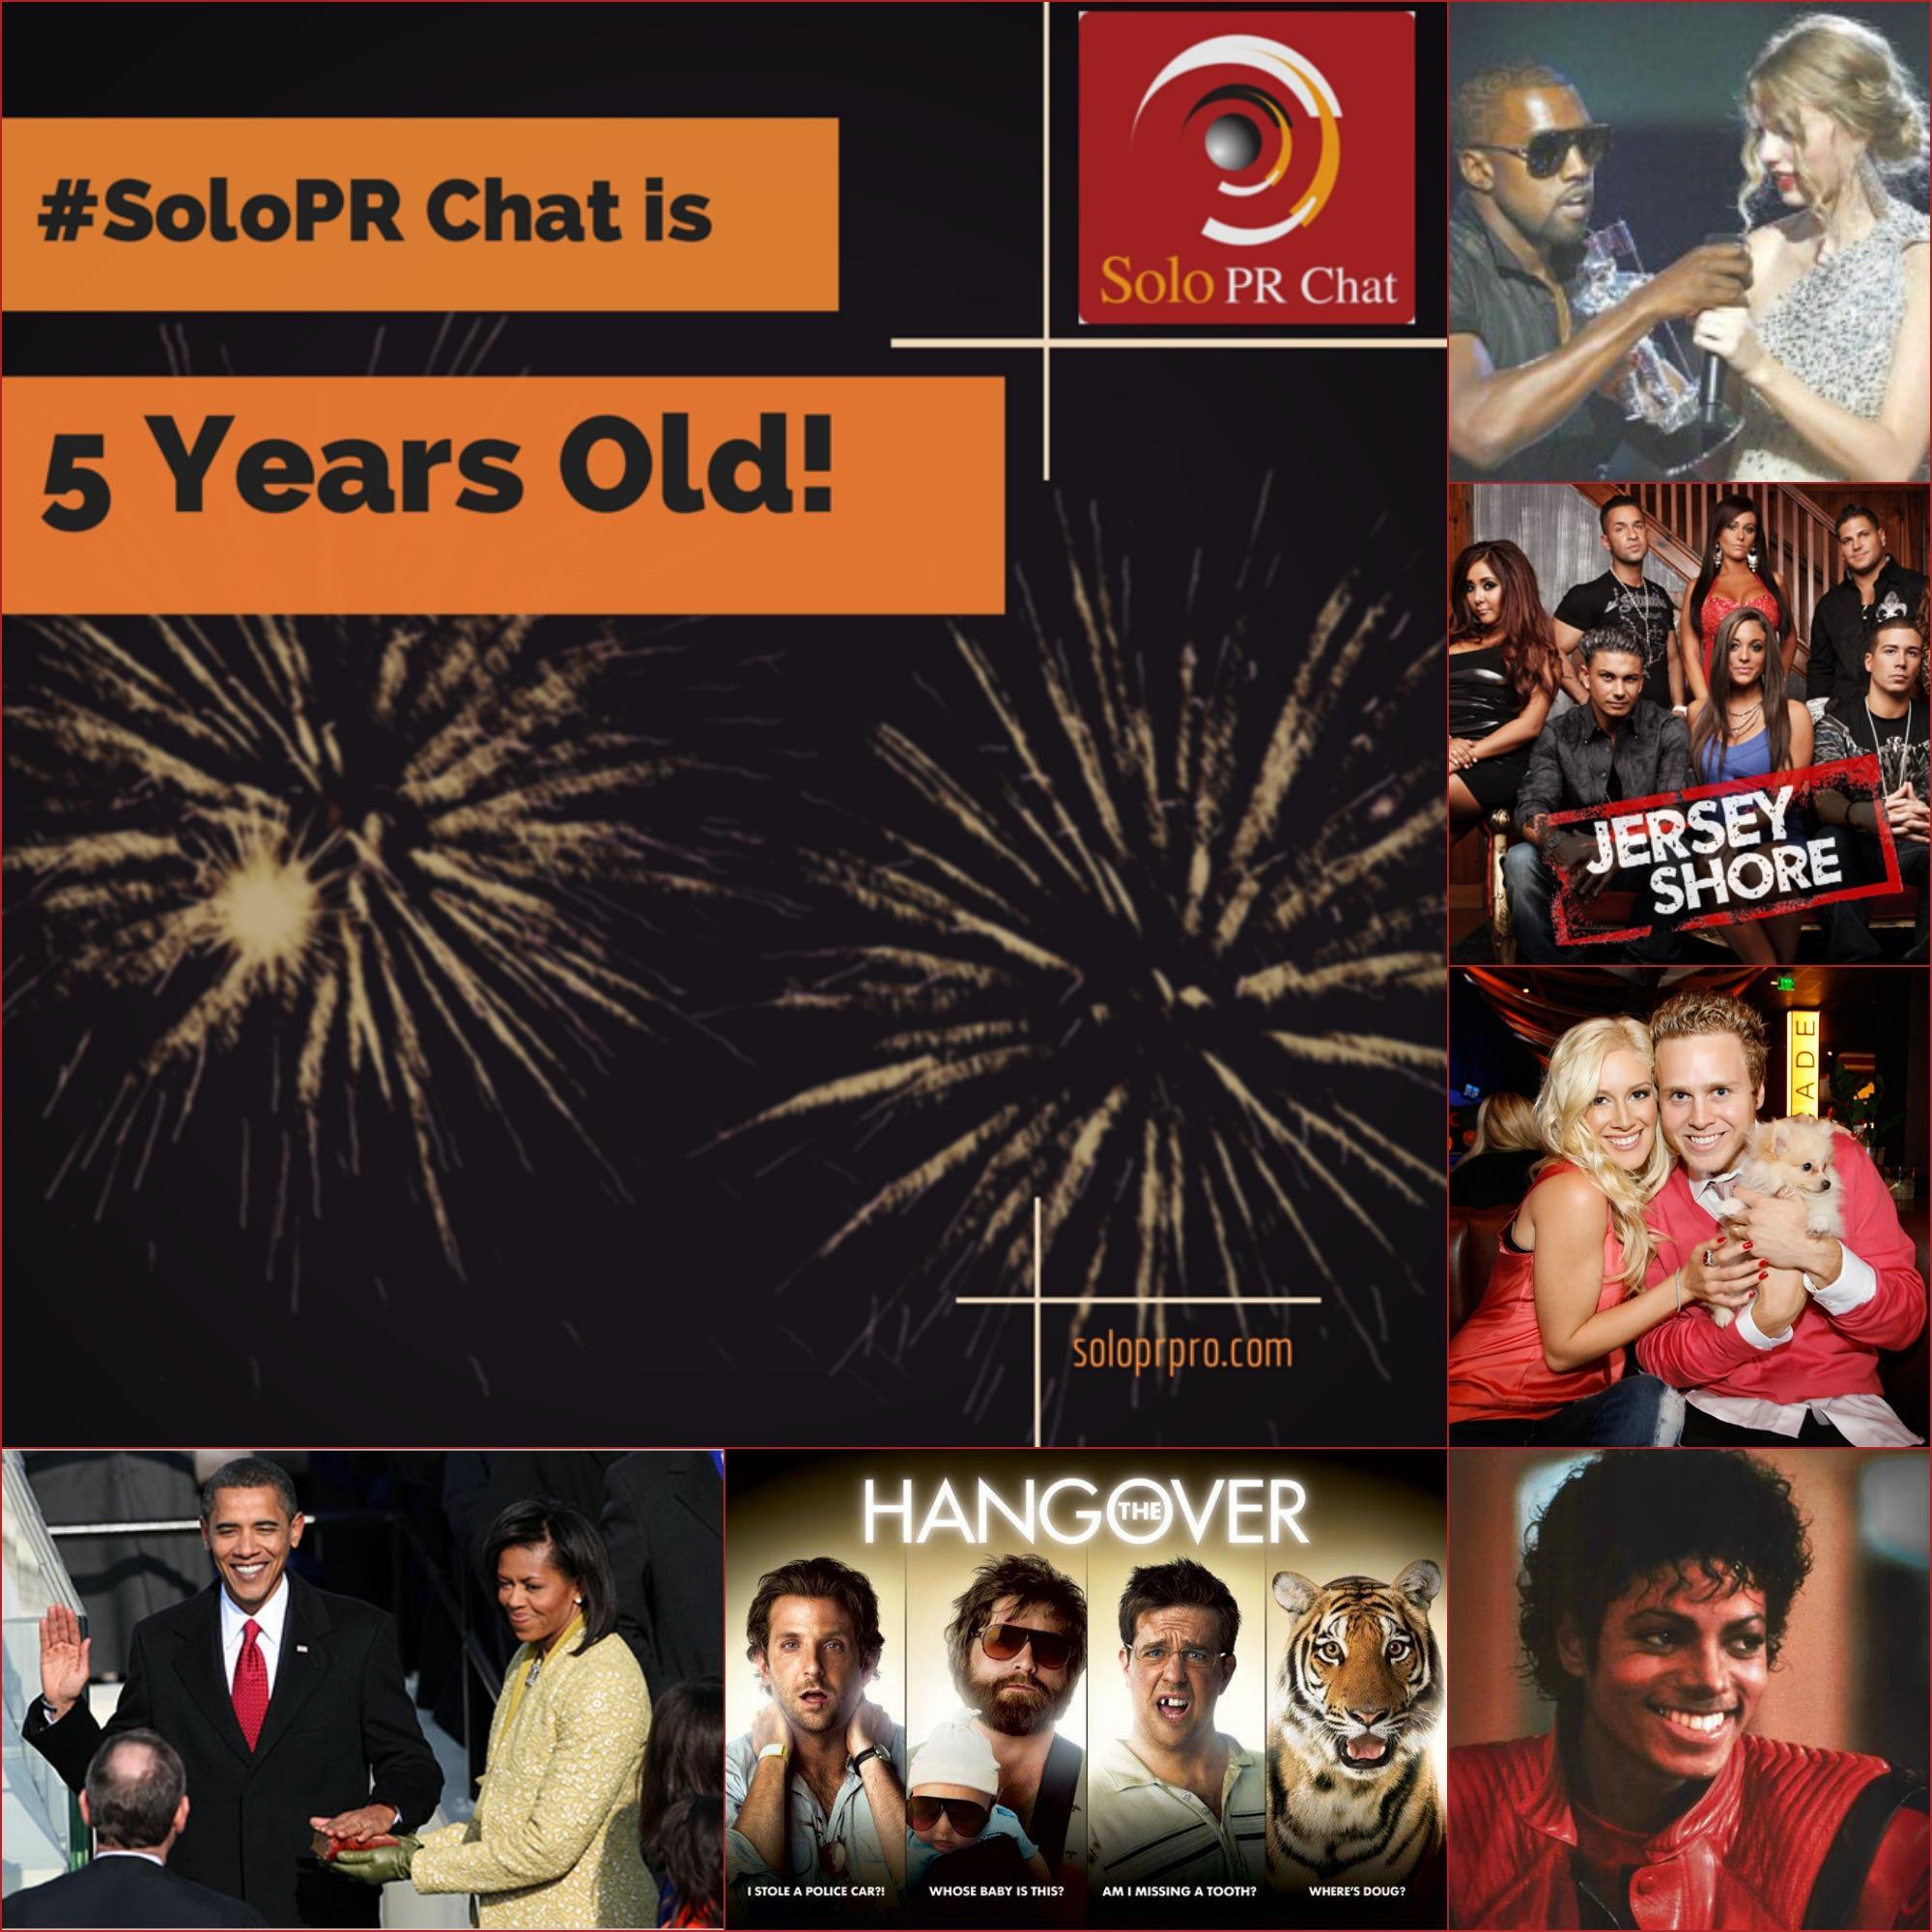 SoloPR Chat is 5 Years Old